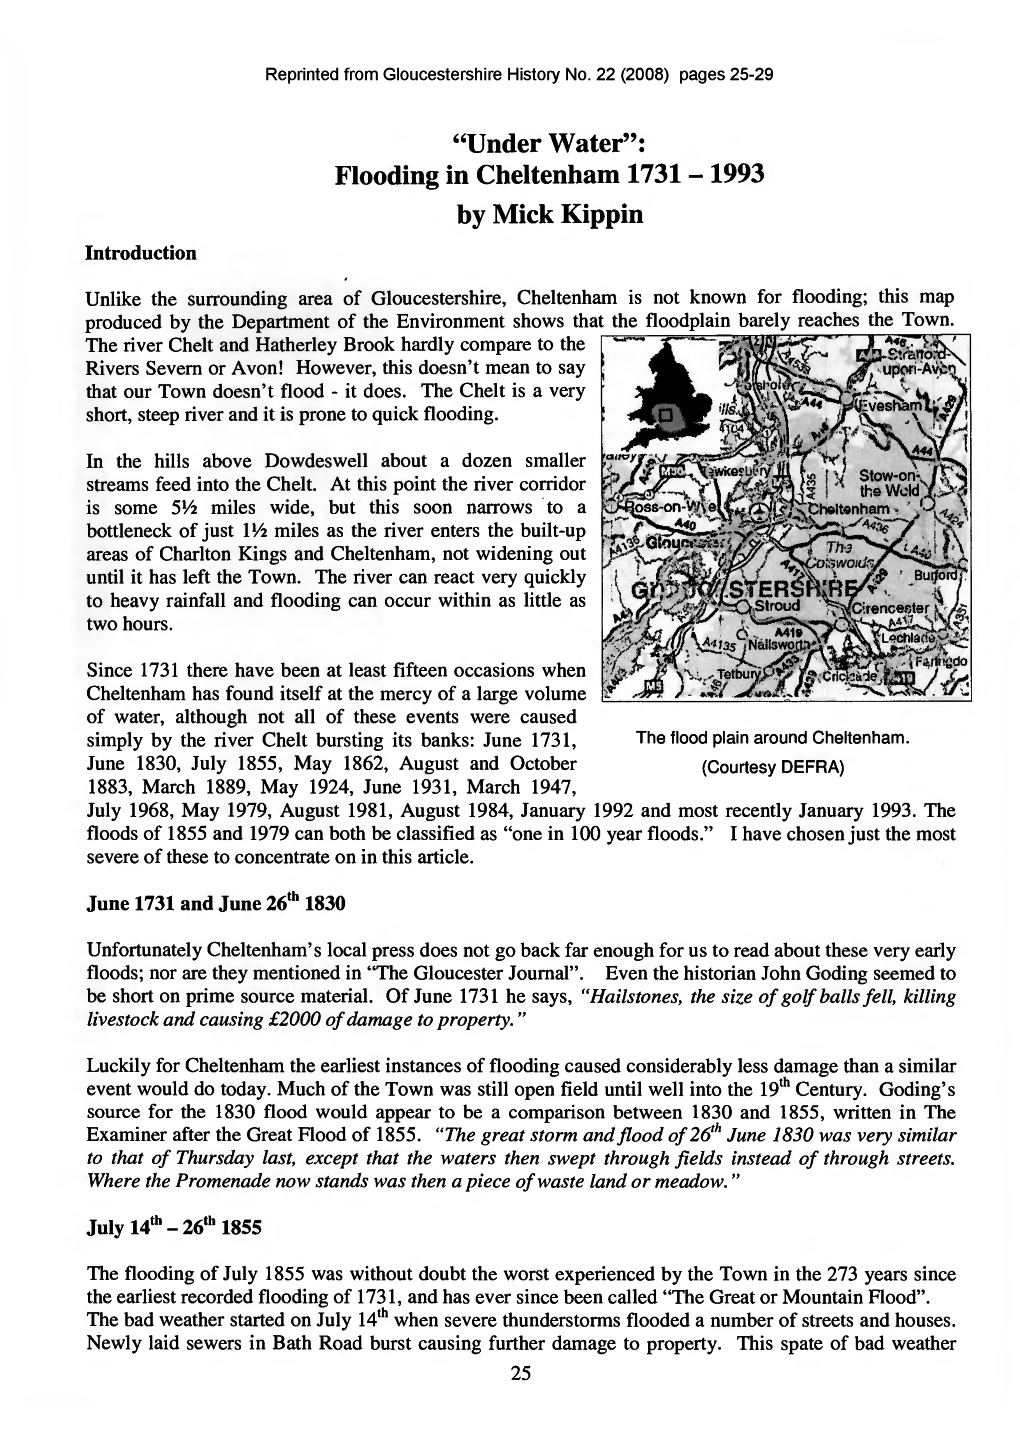 “Under Water”: Flooding in Cheltenham 1731 - 1993 by Mick Kippin Introduction